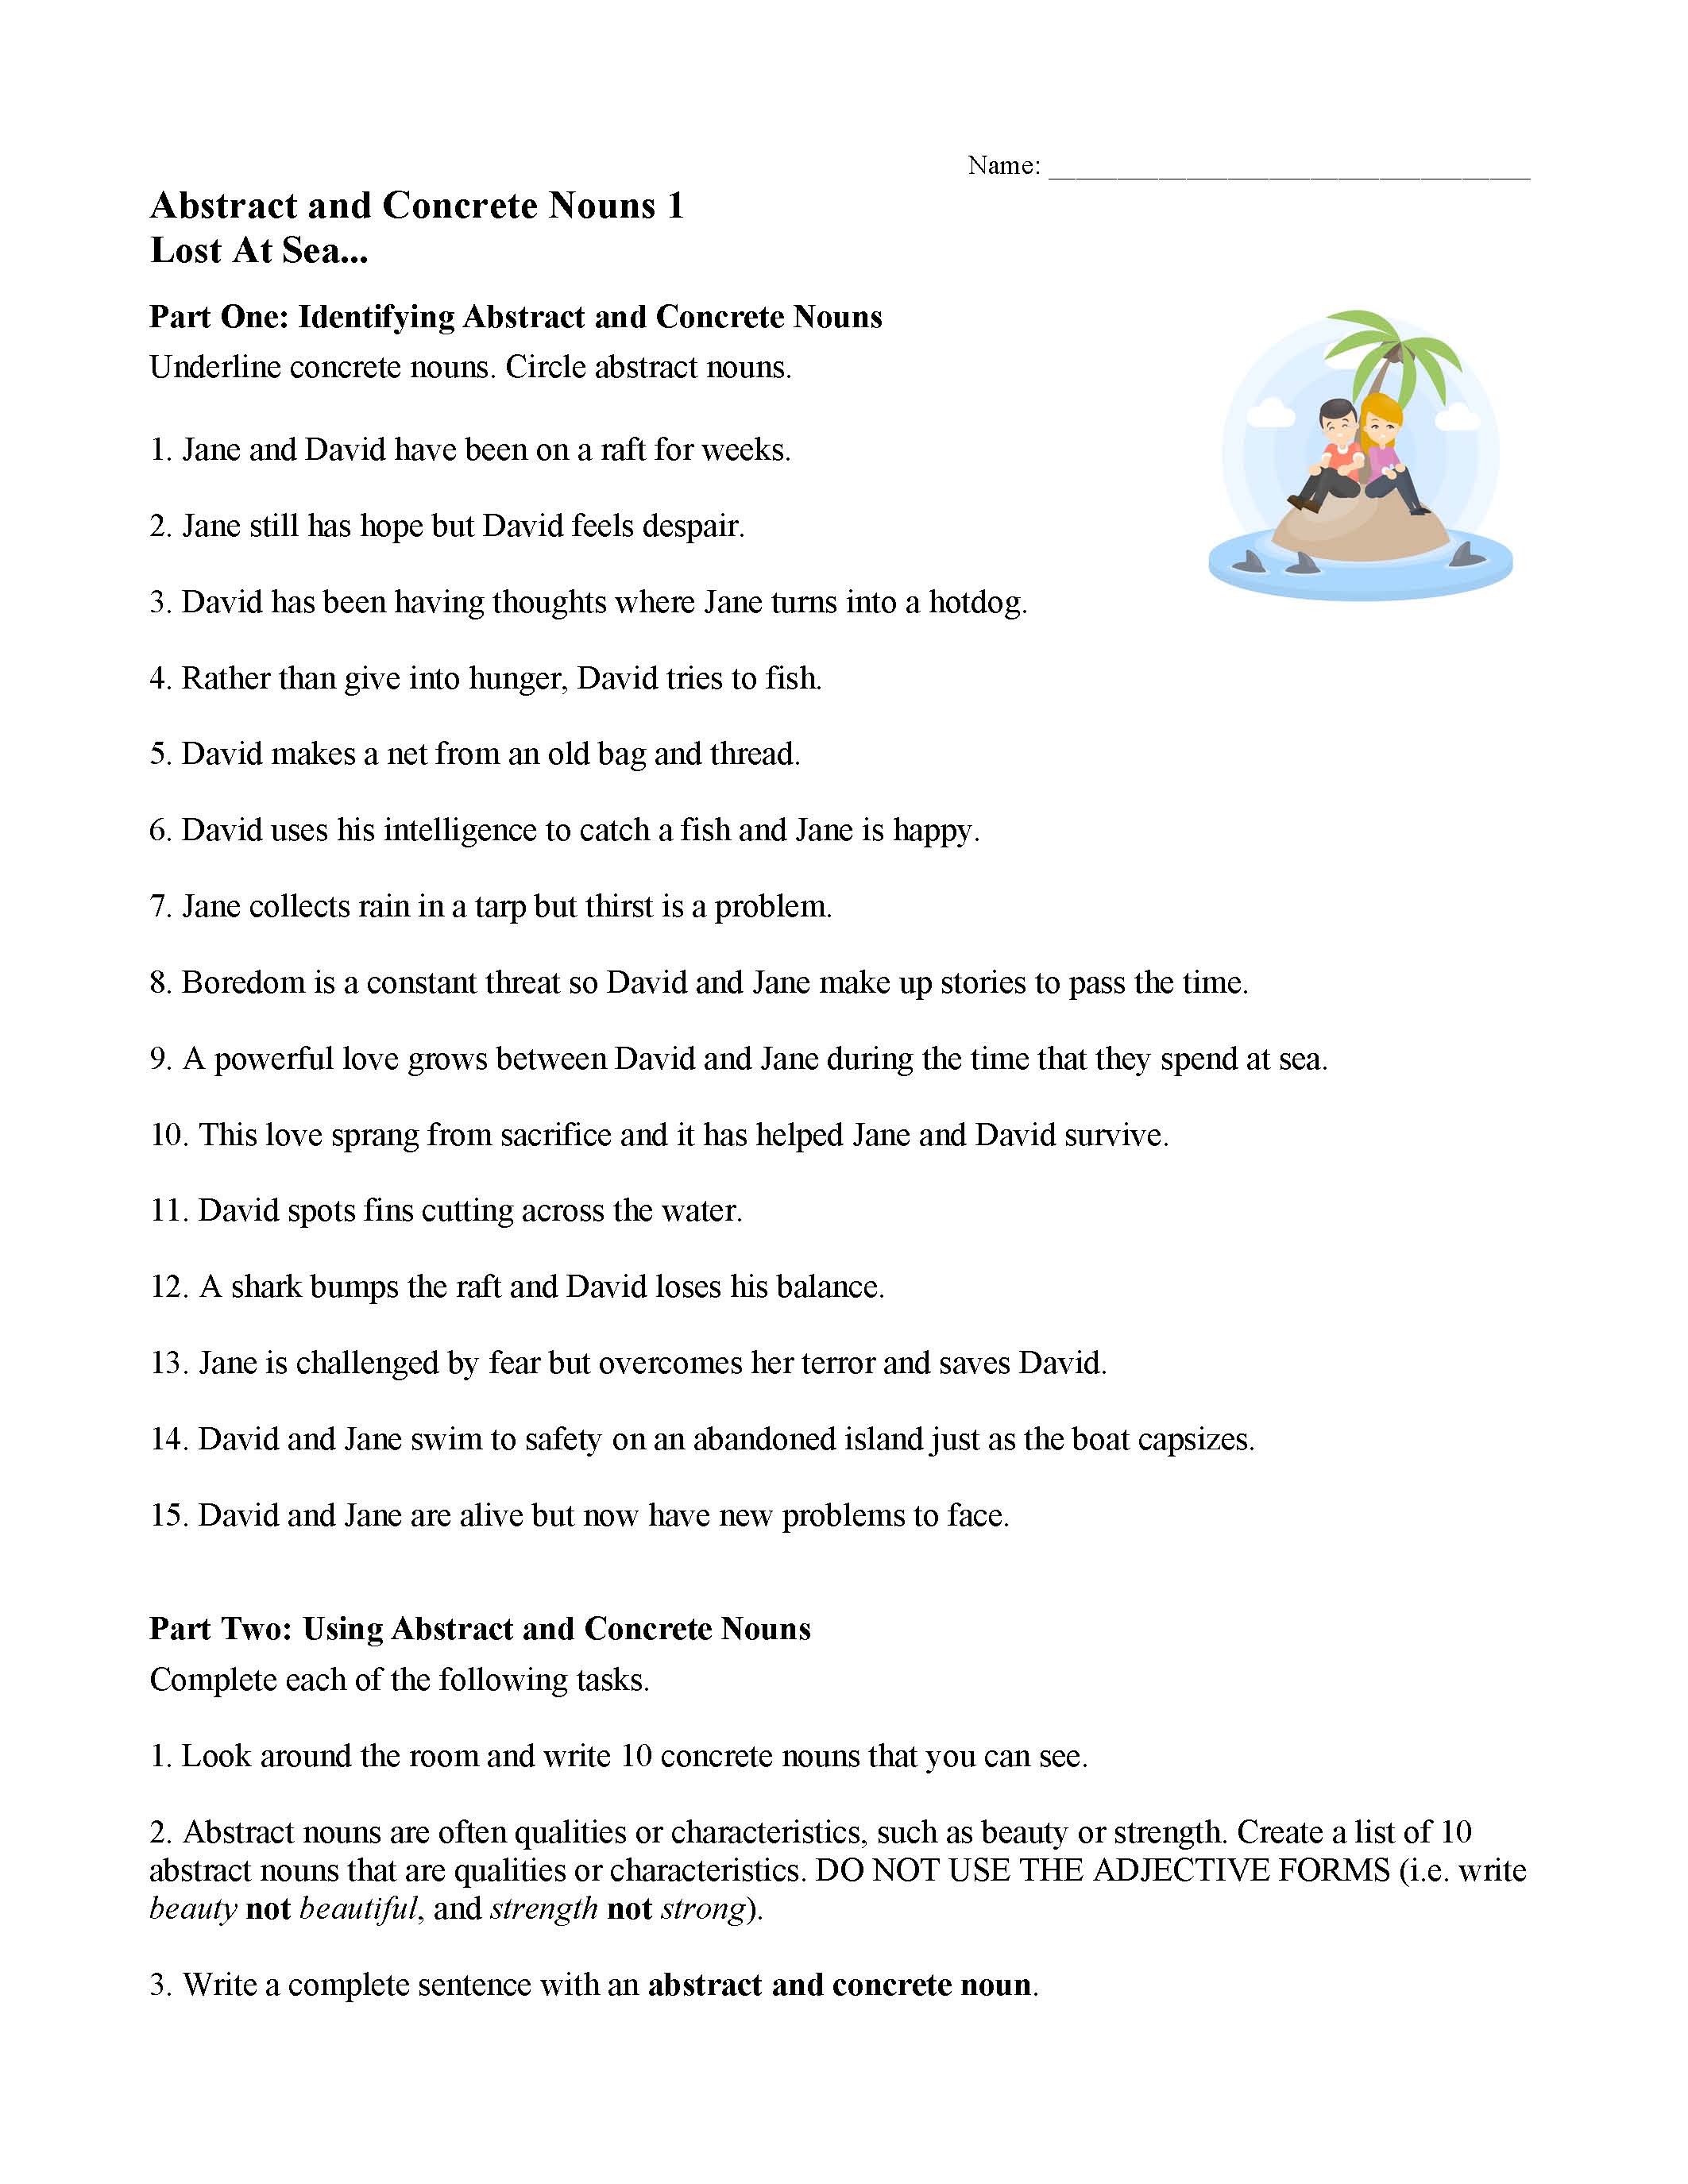 concrete-and-abstract-nouns-worksheet-lost-at-sea-parts-of